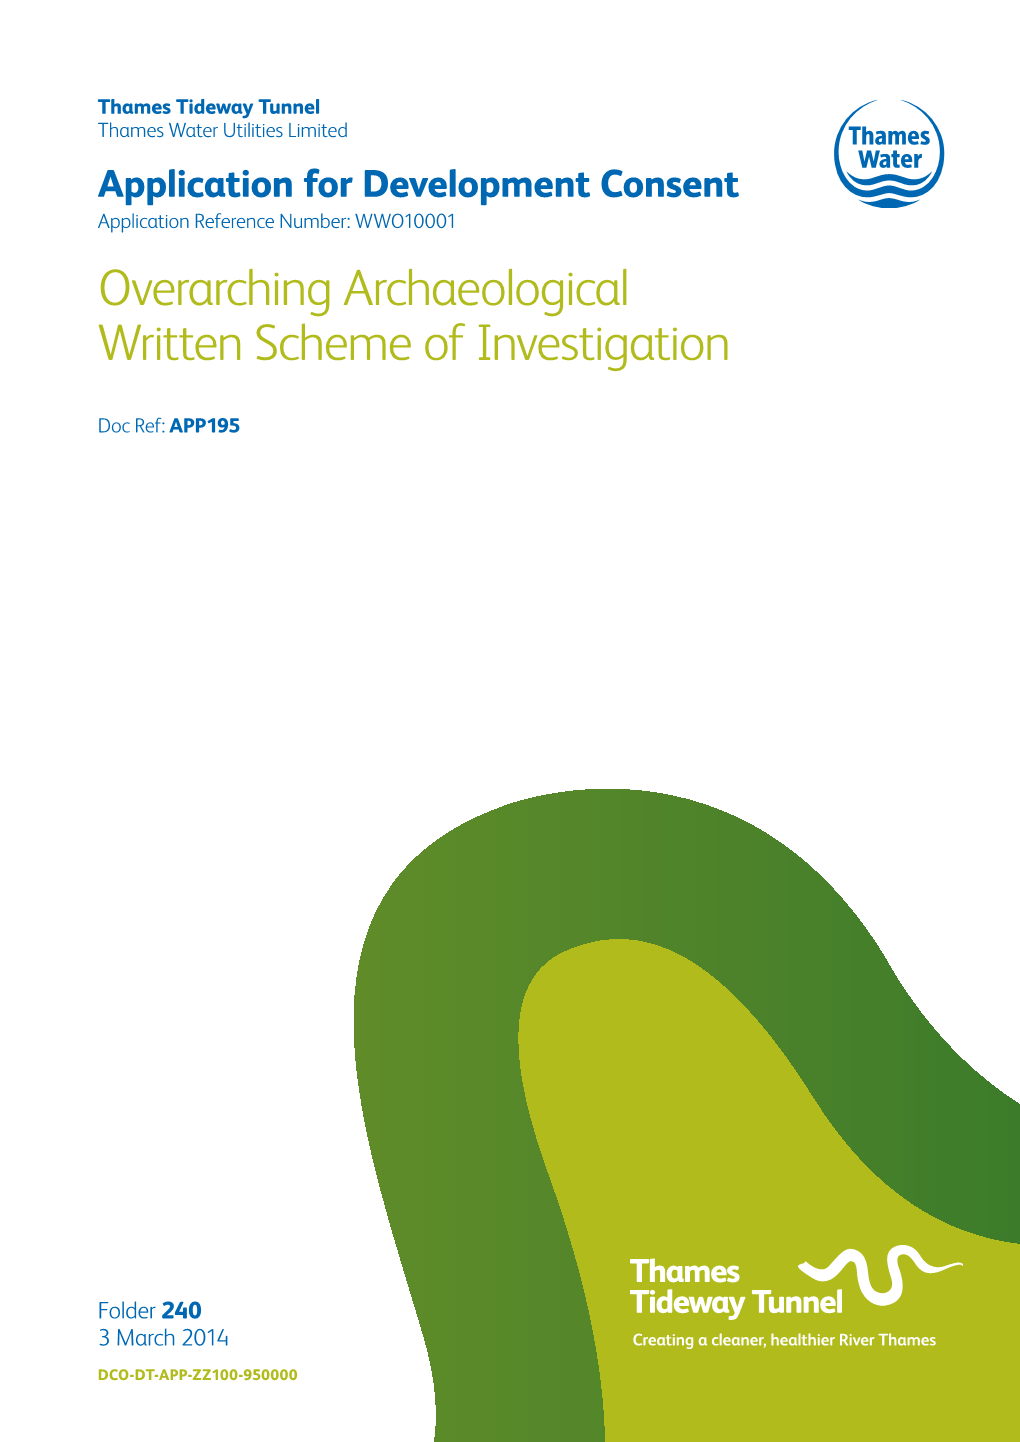 Overarching Archaeological Written Scheme of Investigation